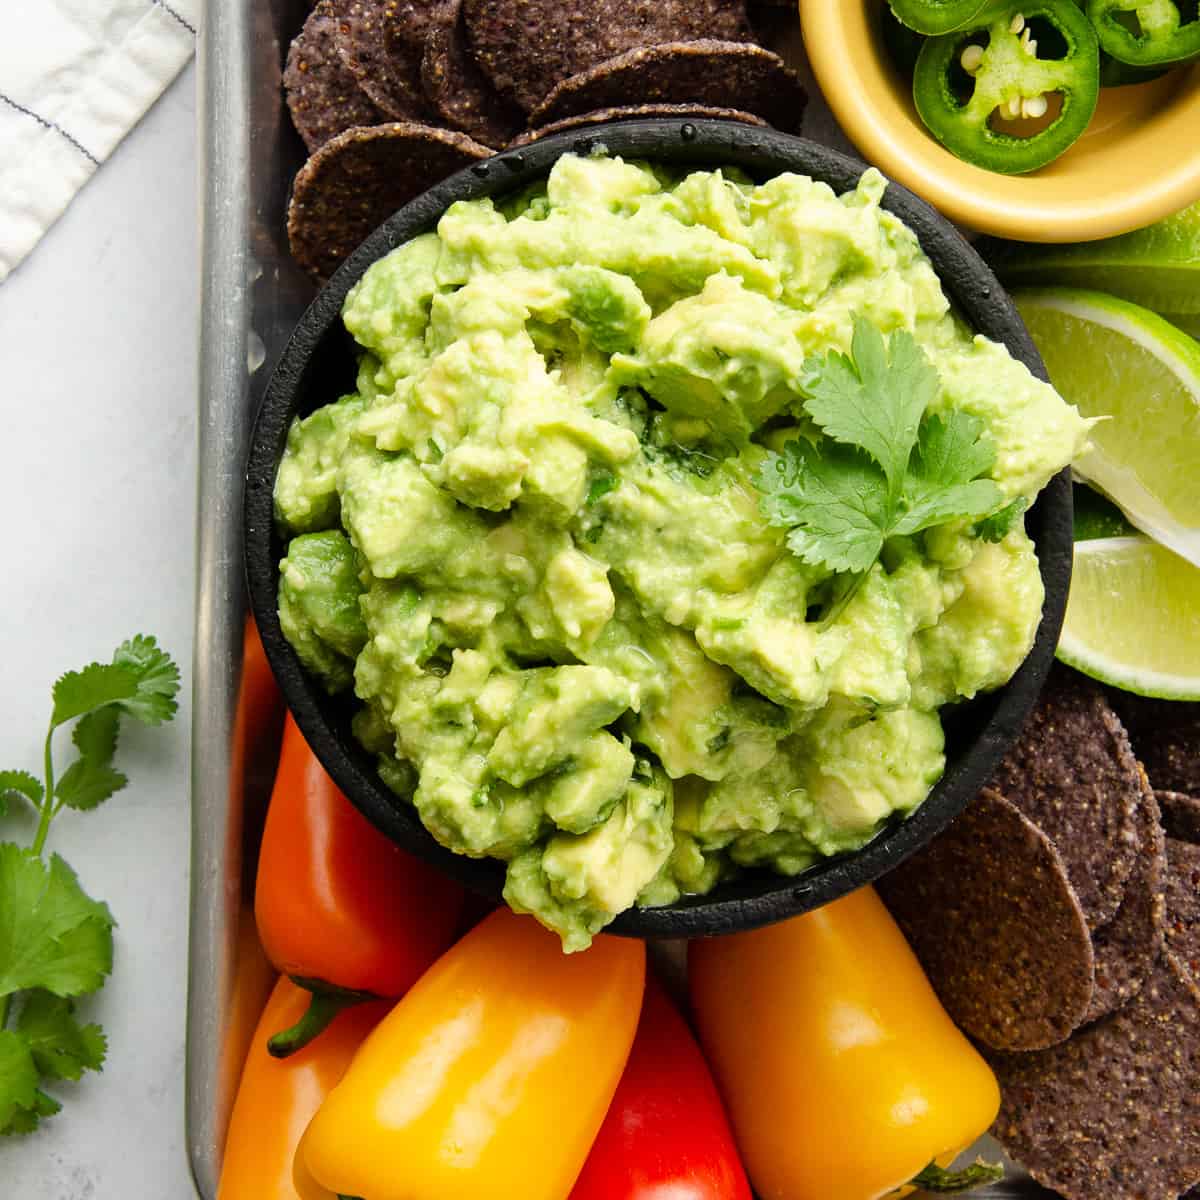 Best guacamole recipe! (How to pick avocados, prep ahead, store, freeze)